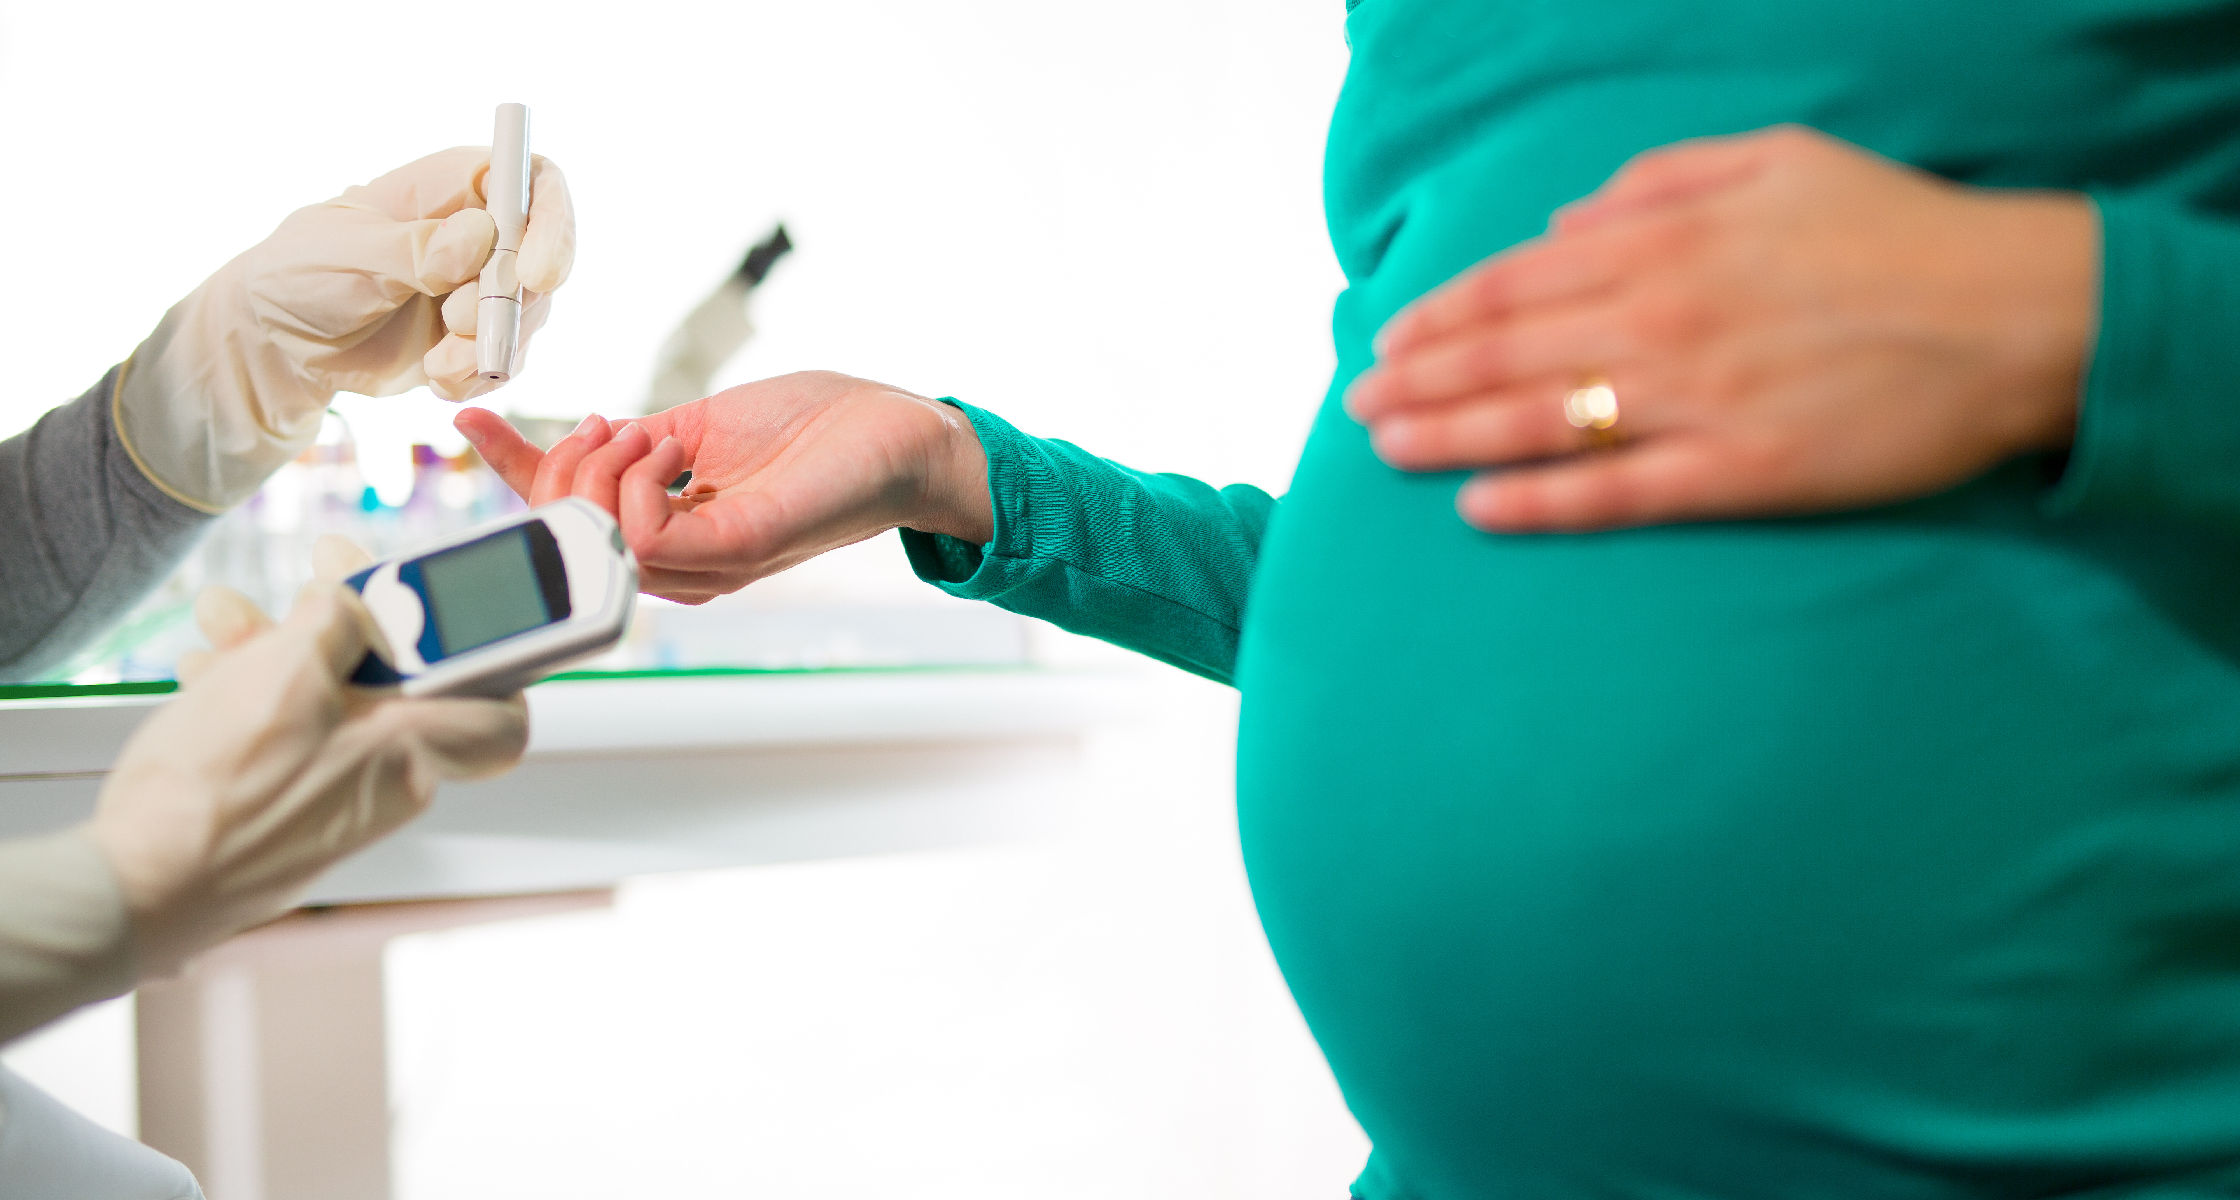 Diabetes In Pregnancy Tied To Altered Fat Cells In Adult Offspring